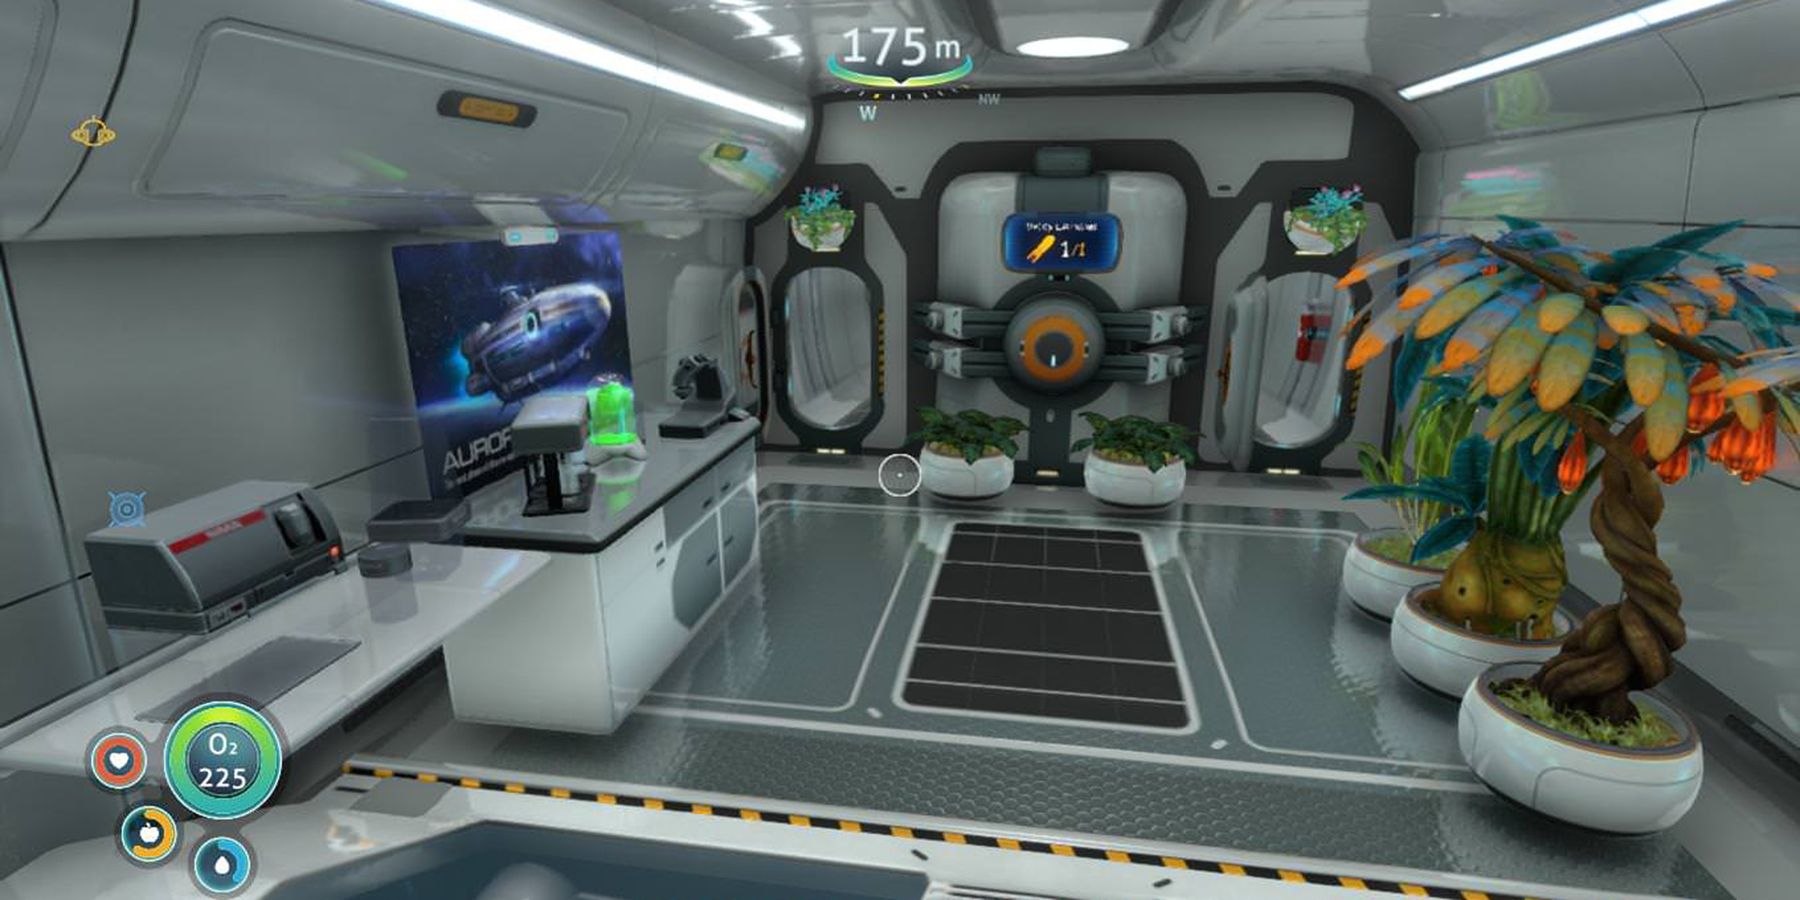 Subnautica Room Filled With Decorations